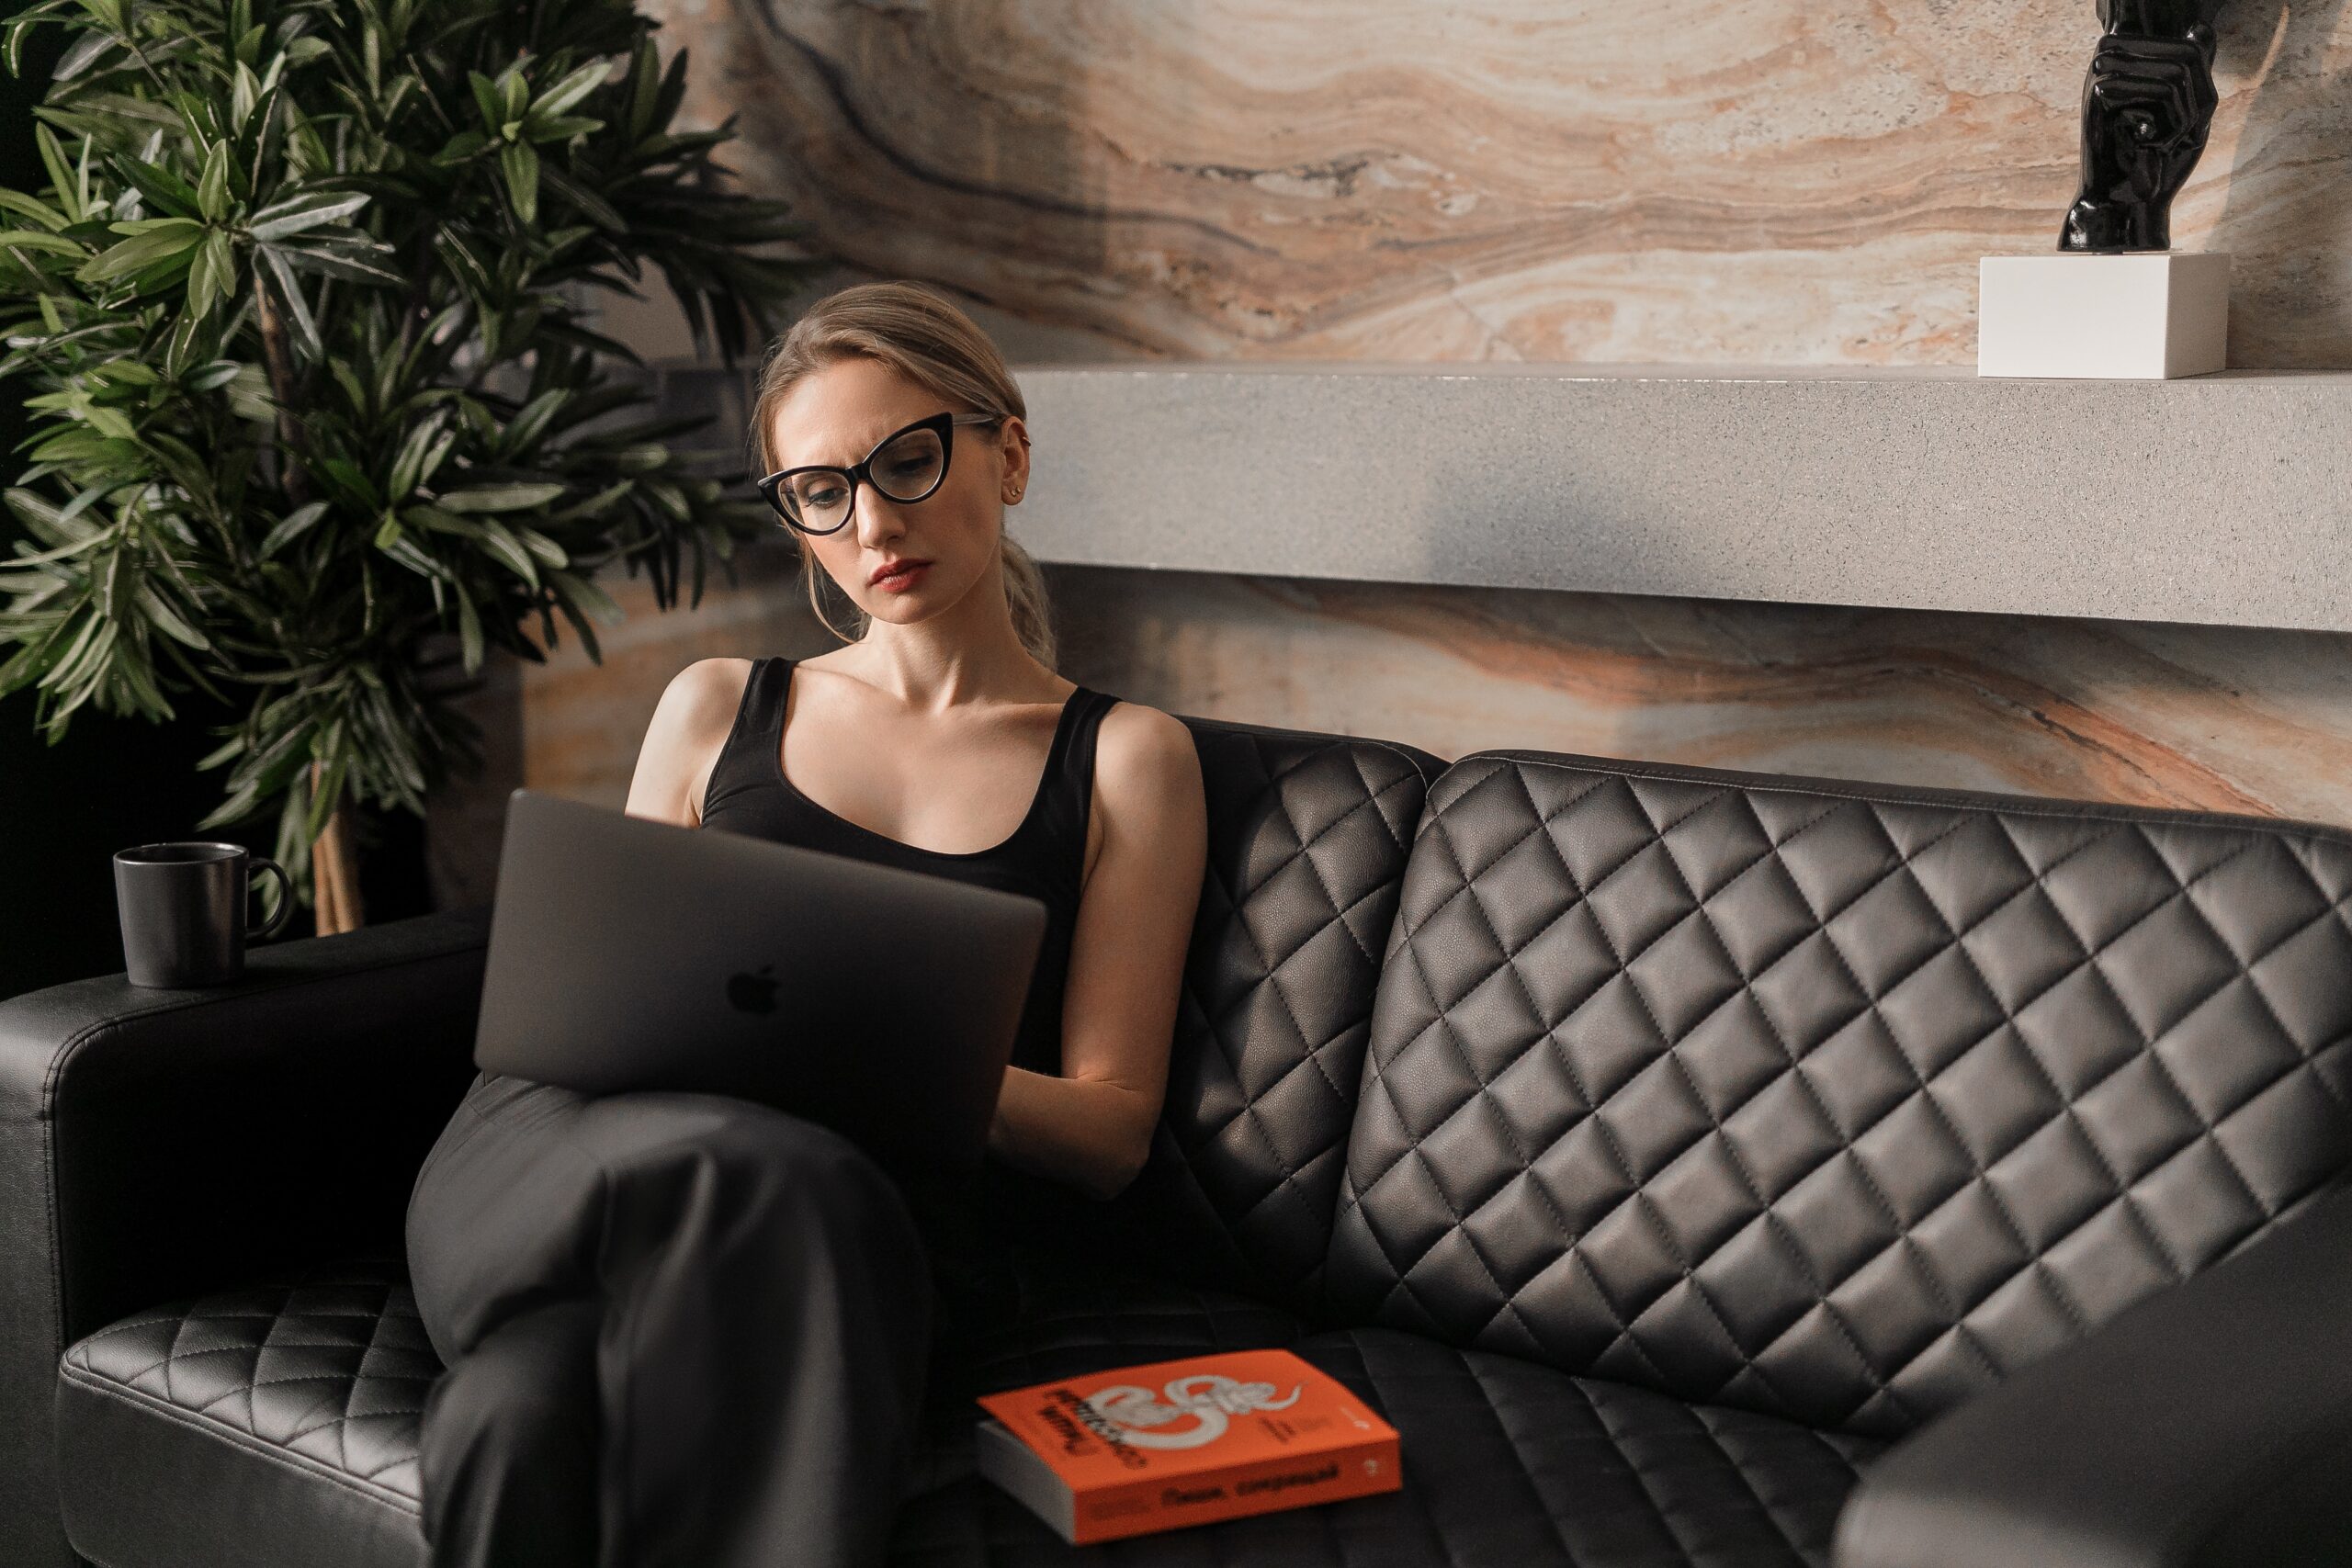 Young woman working on a leather couch in a creative office space